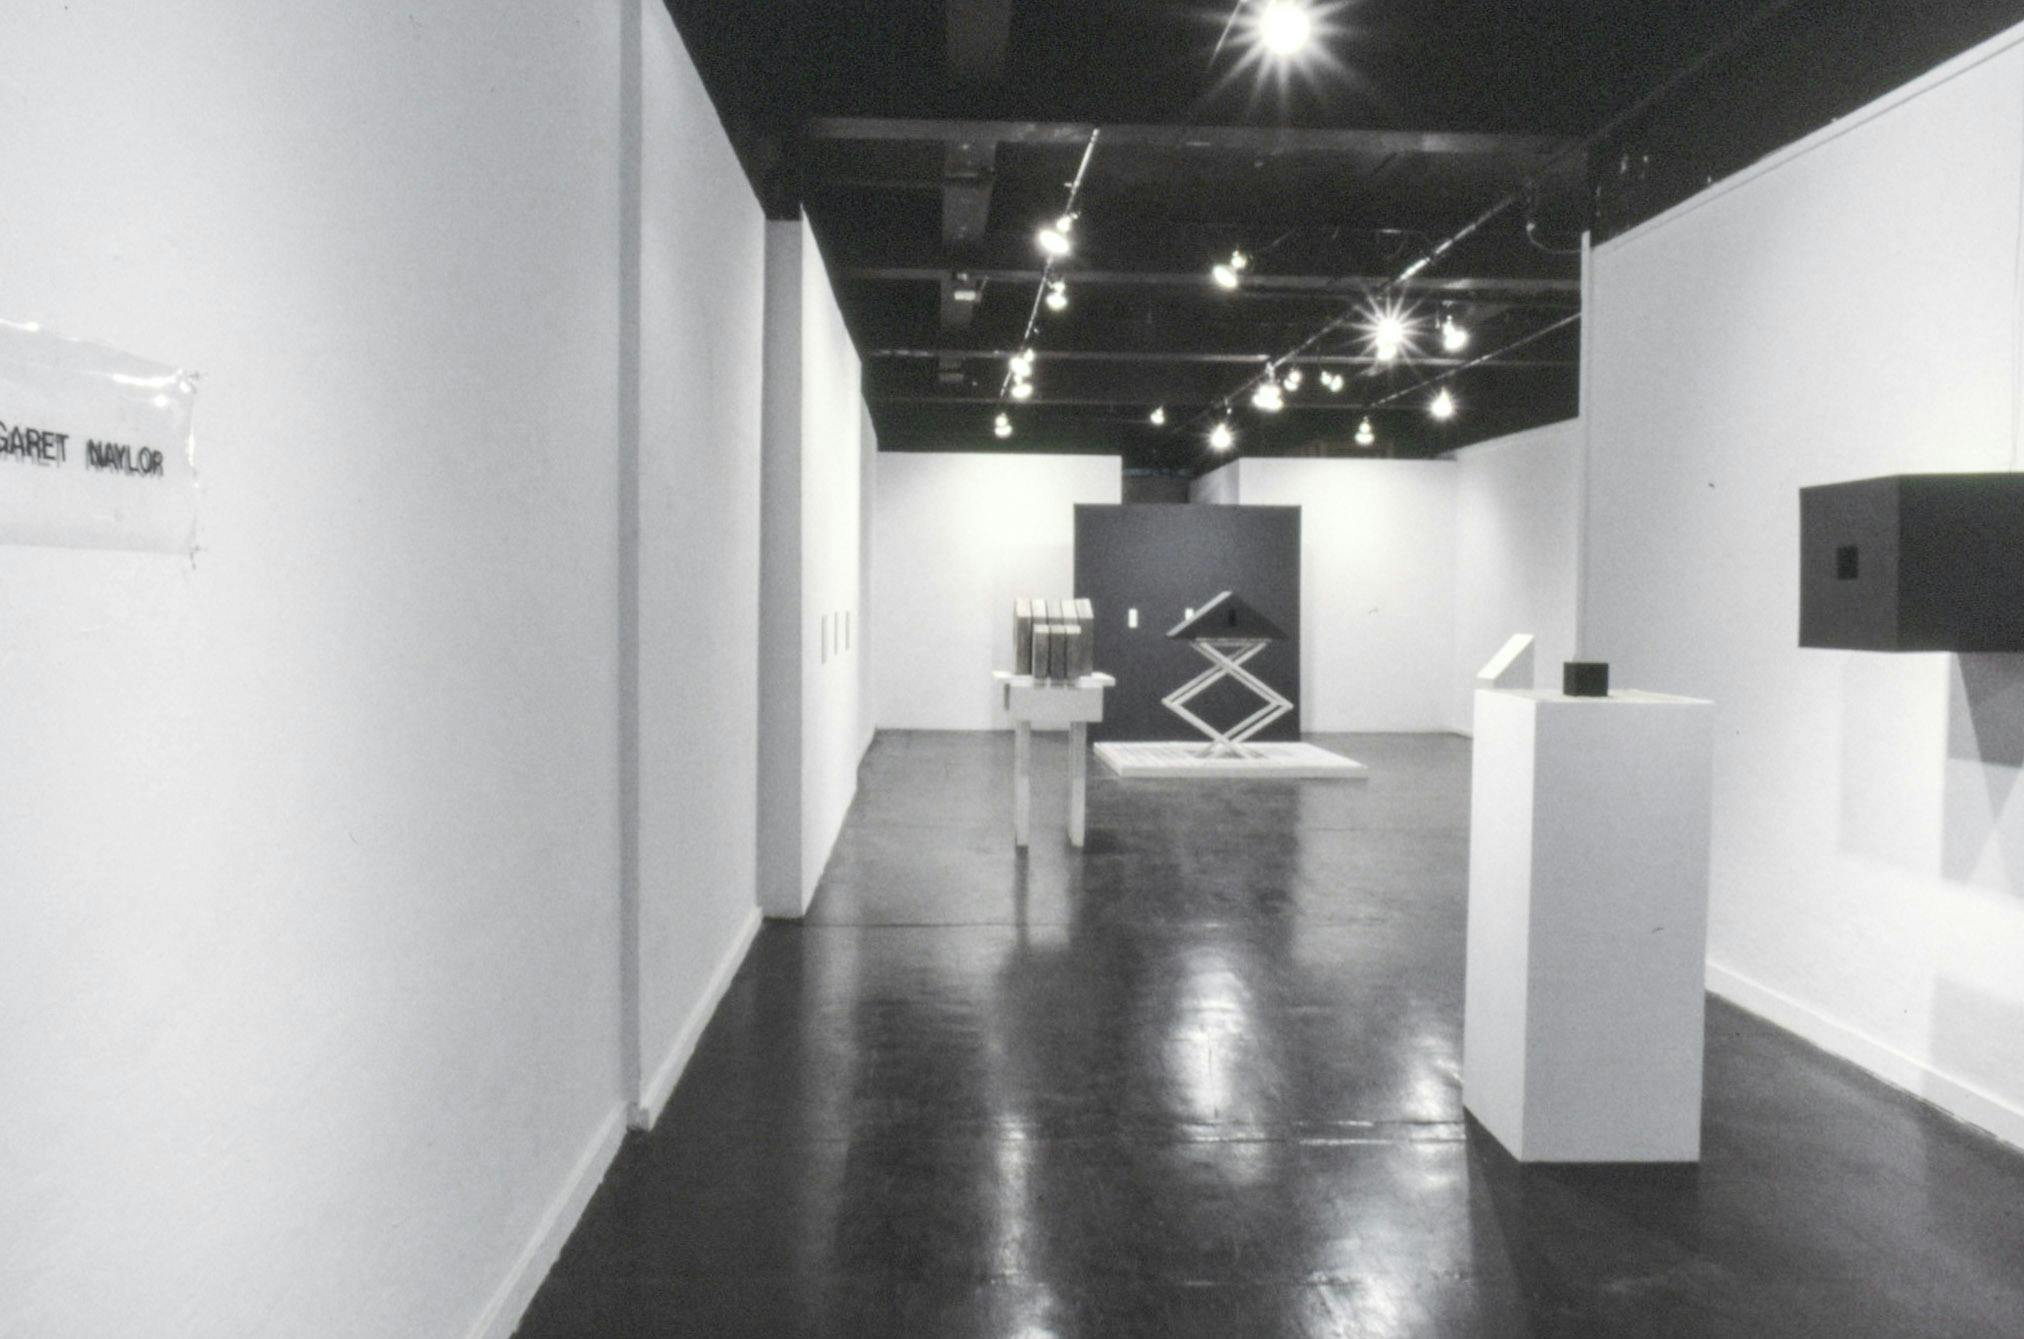 Several artworks in a gallery space. Most of the works are black sculptures on white surfaces. At the entrance, a partial view of a clear plastic sheets with black letters reading "Margaret Naylor." 